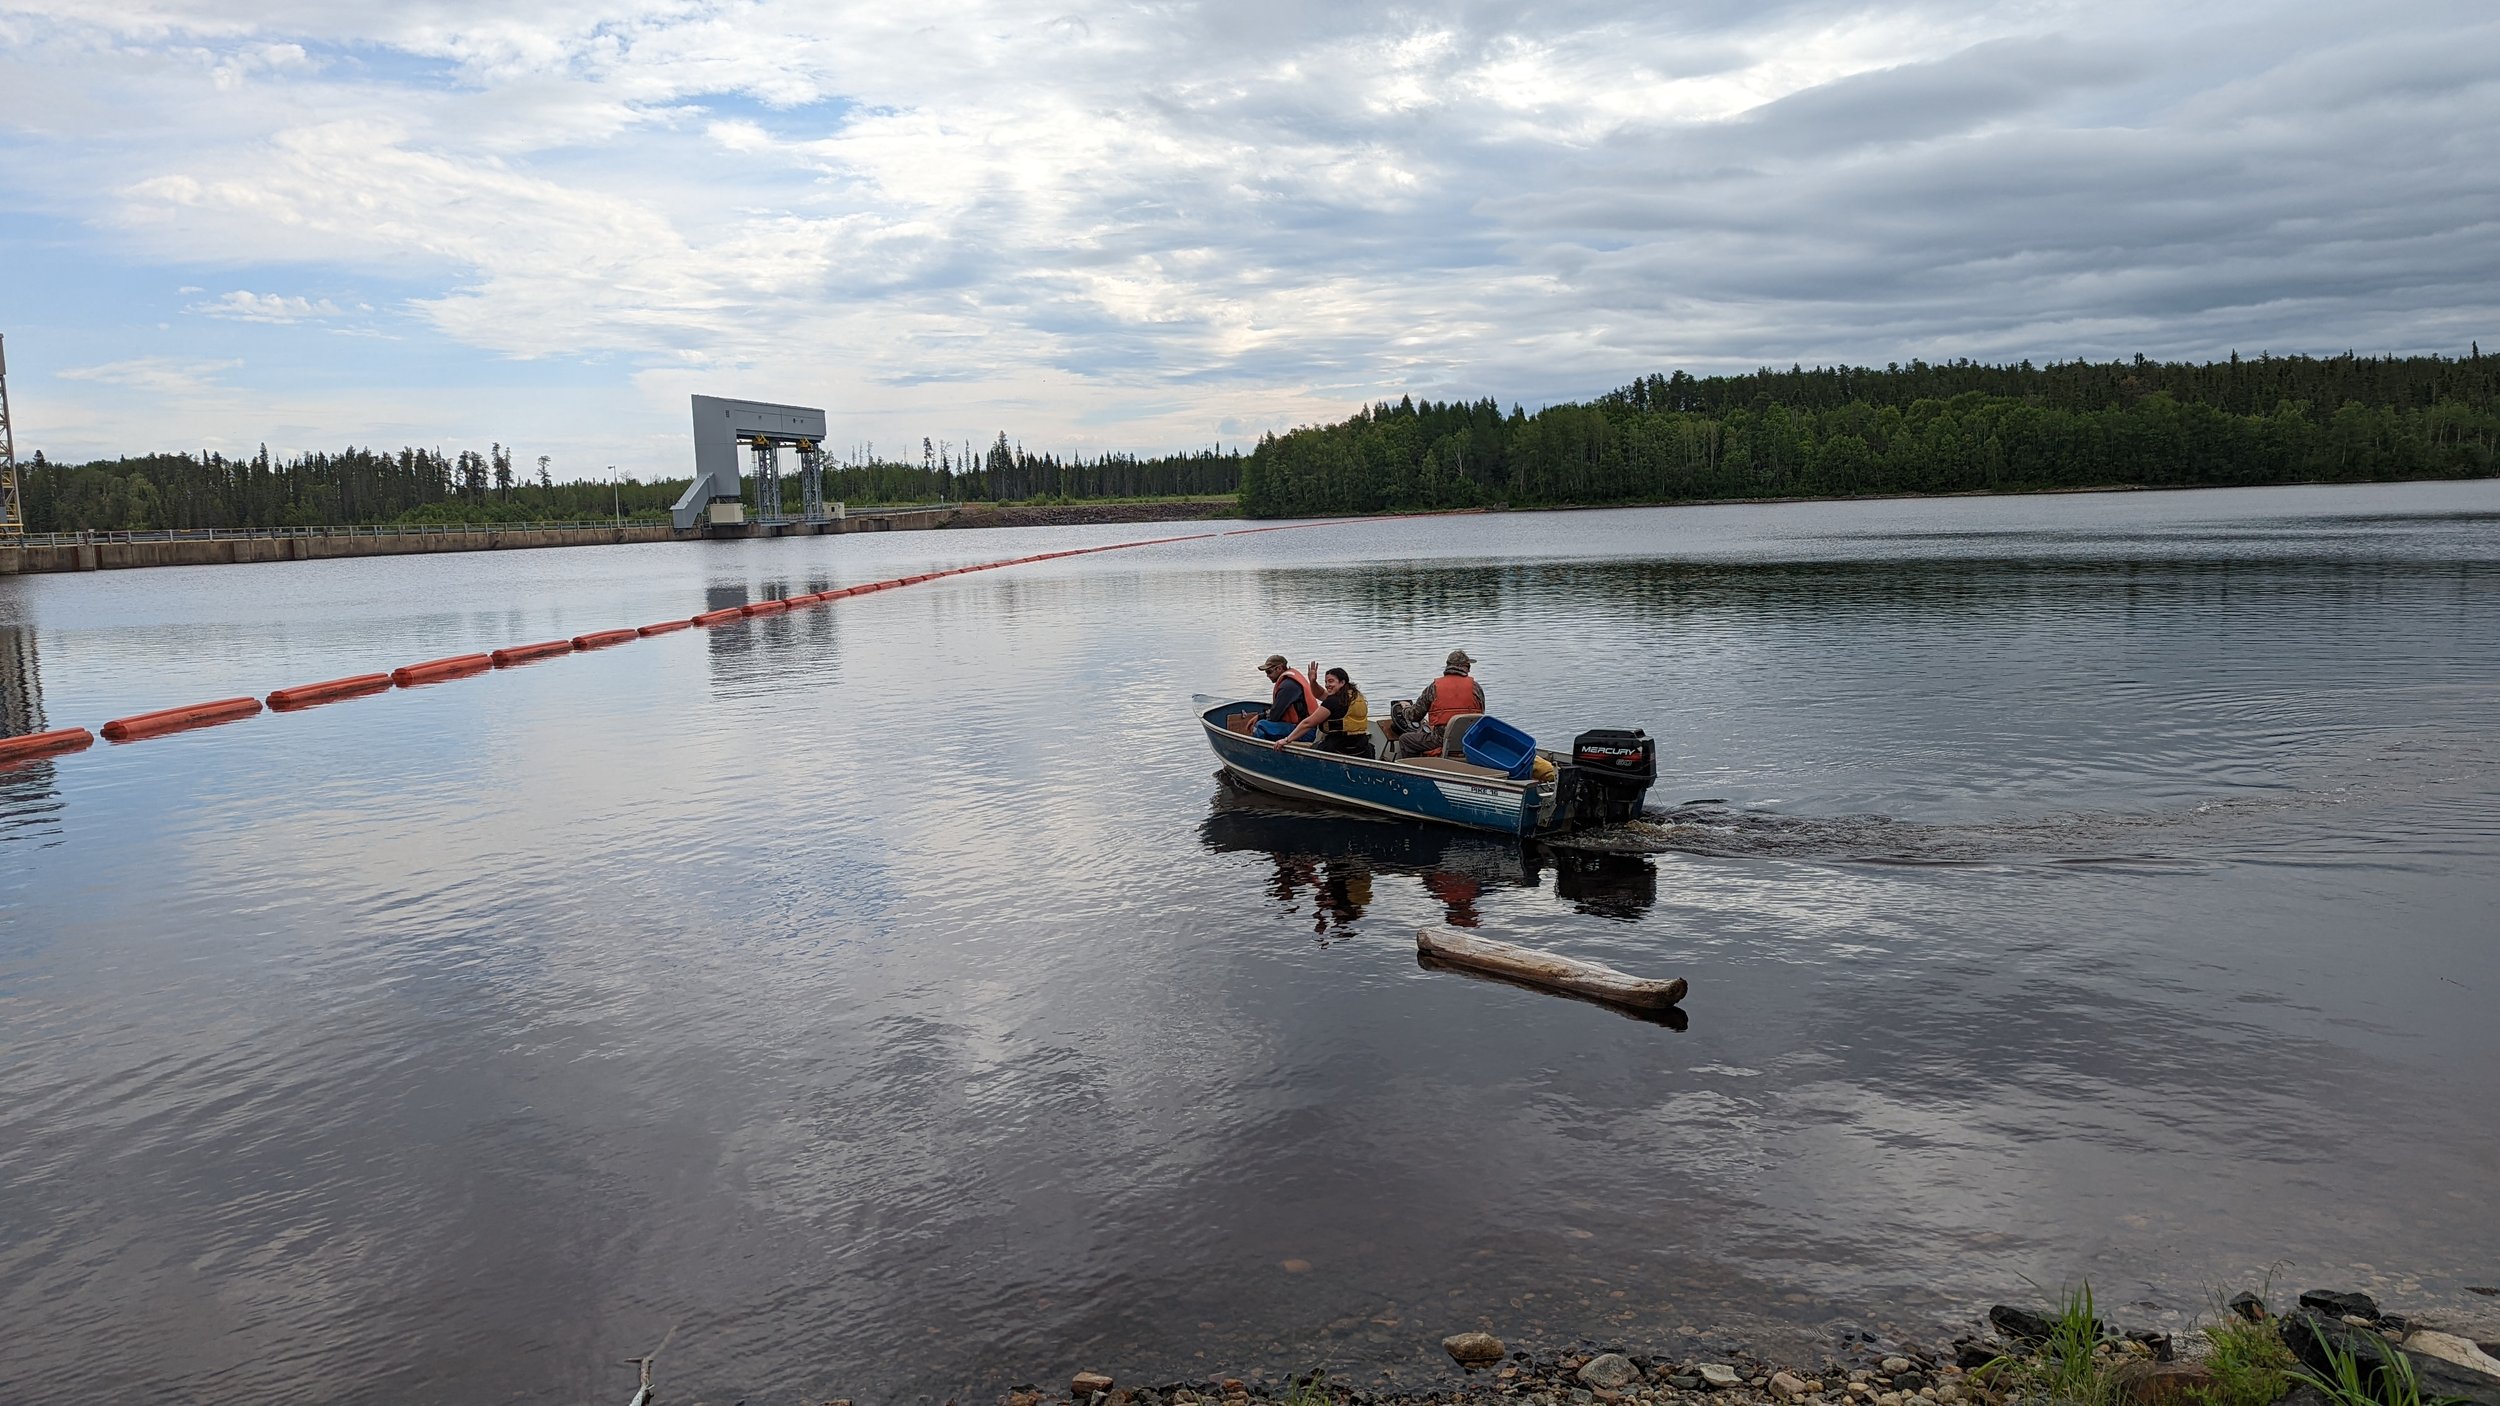 Some of the Mattagami River field crew head out to check a net for lake sturgeon. In the background is one of the dams of the Lower Mattagami Hydroelectric Complex.